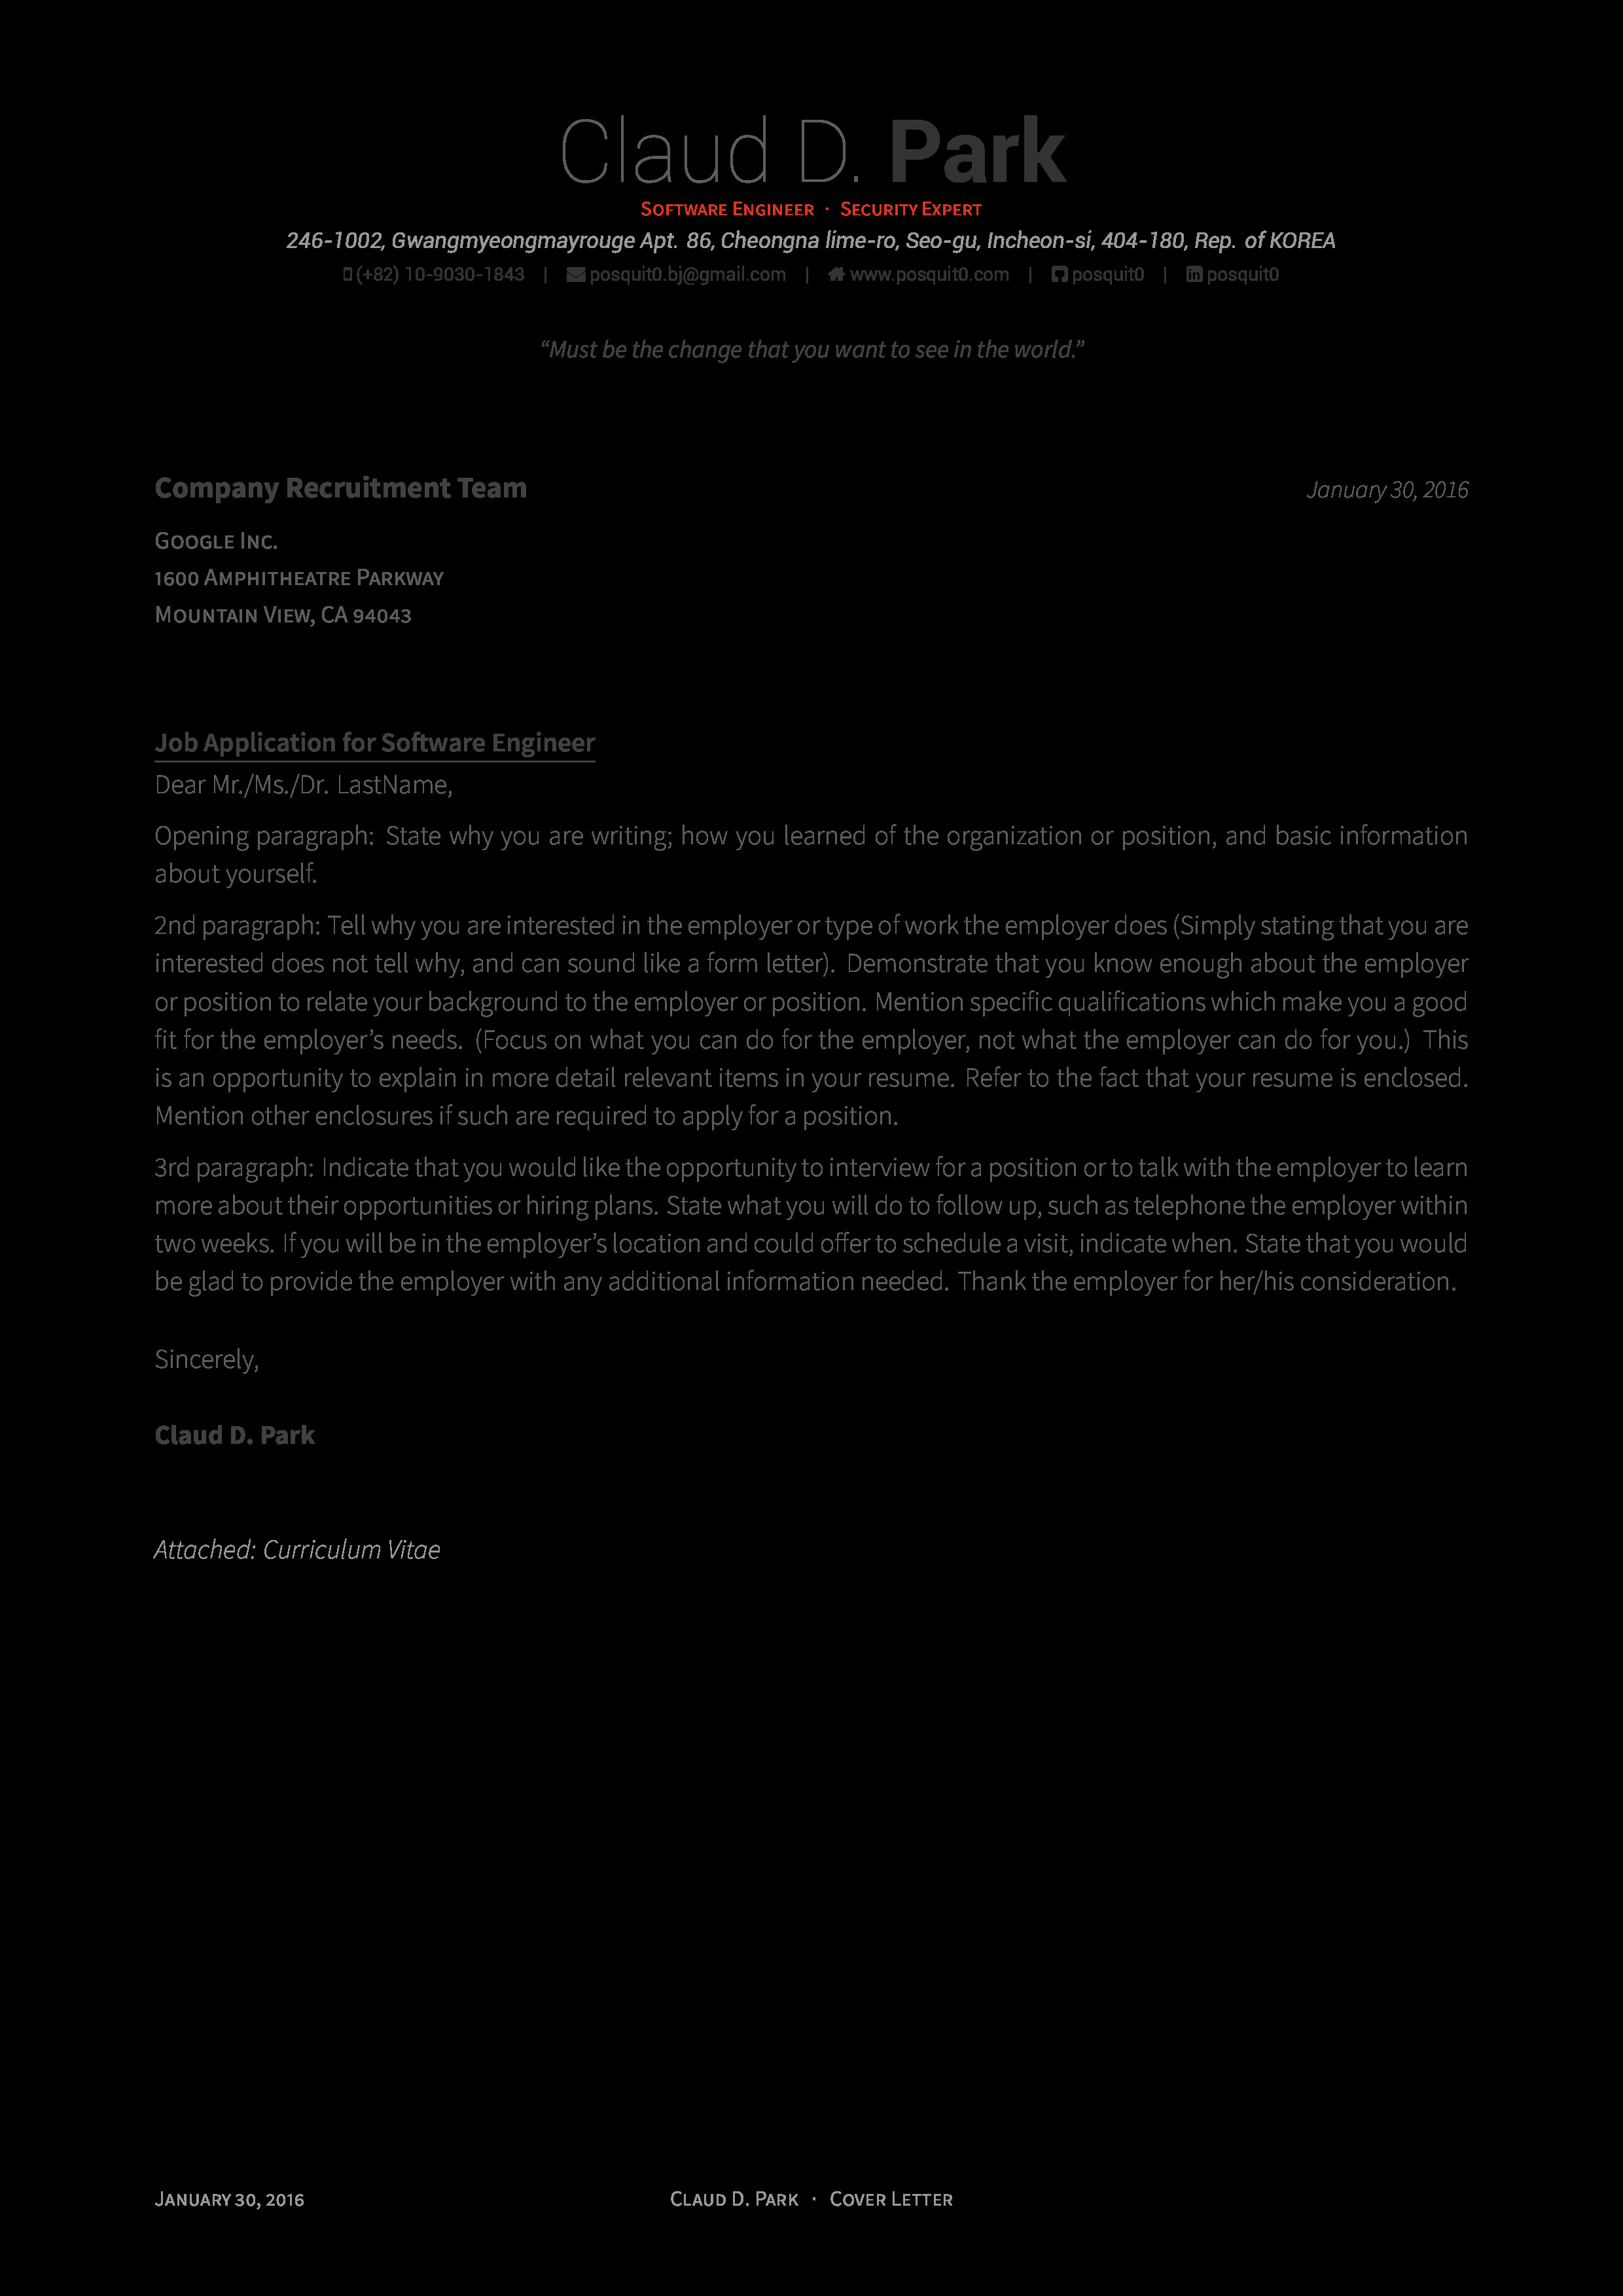 Latex Cover Letter Template Github Posquit0 Awesome Cv Awesome Cv is Latex Template